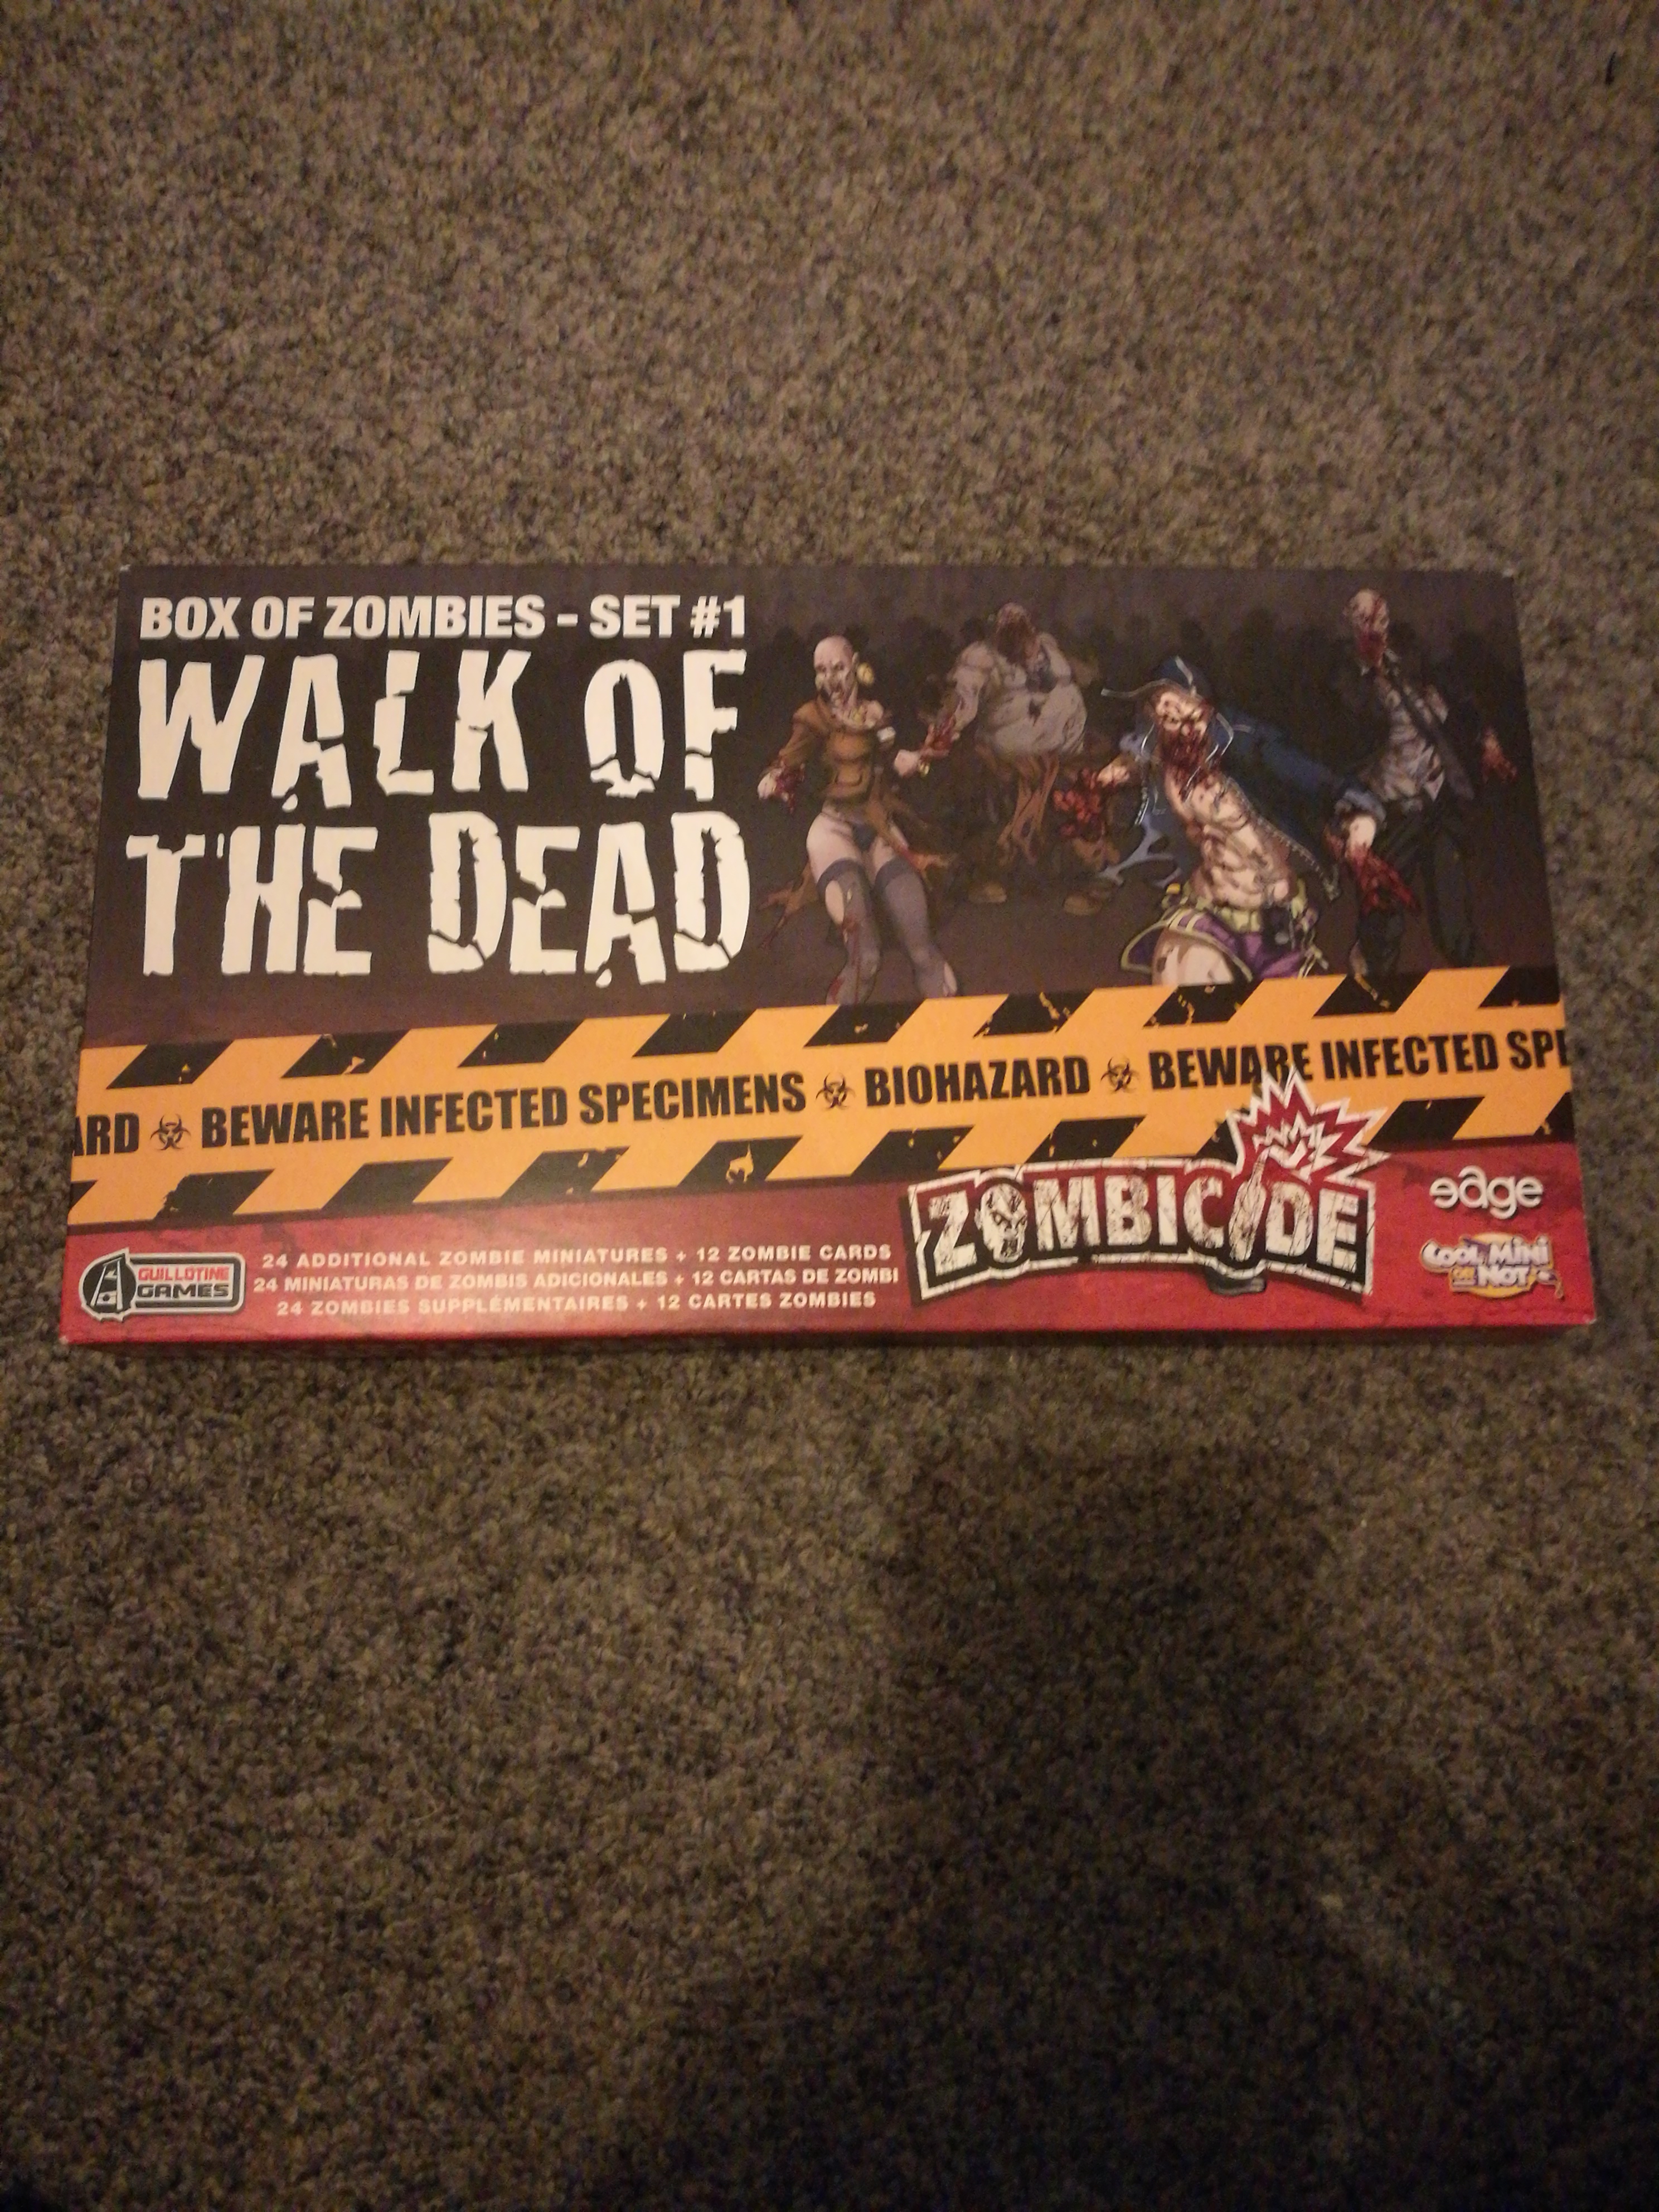 Zombicide - box of zombies - set #1 - walk oh the dead